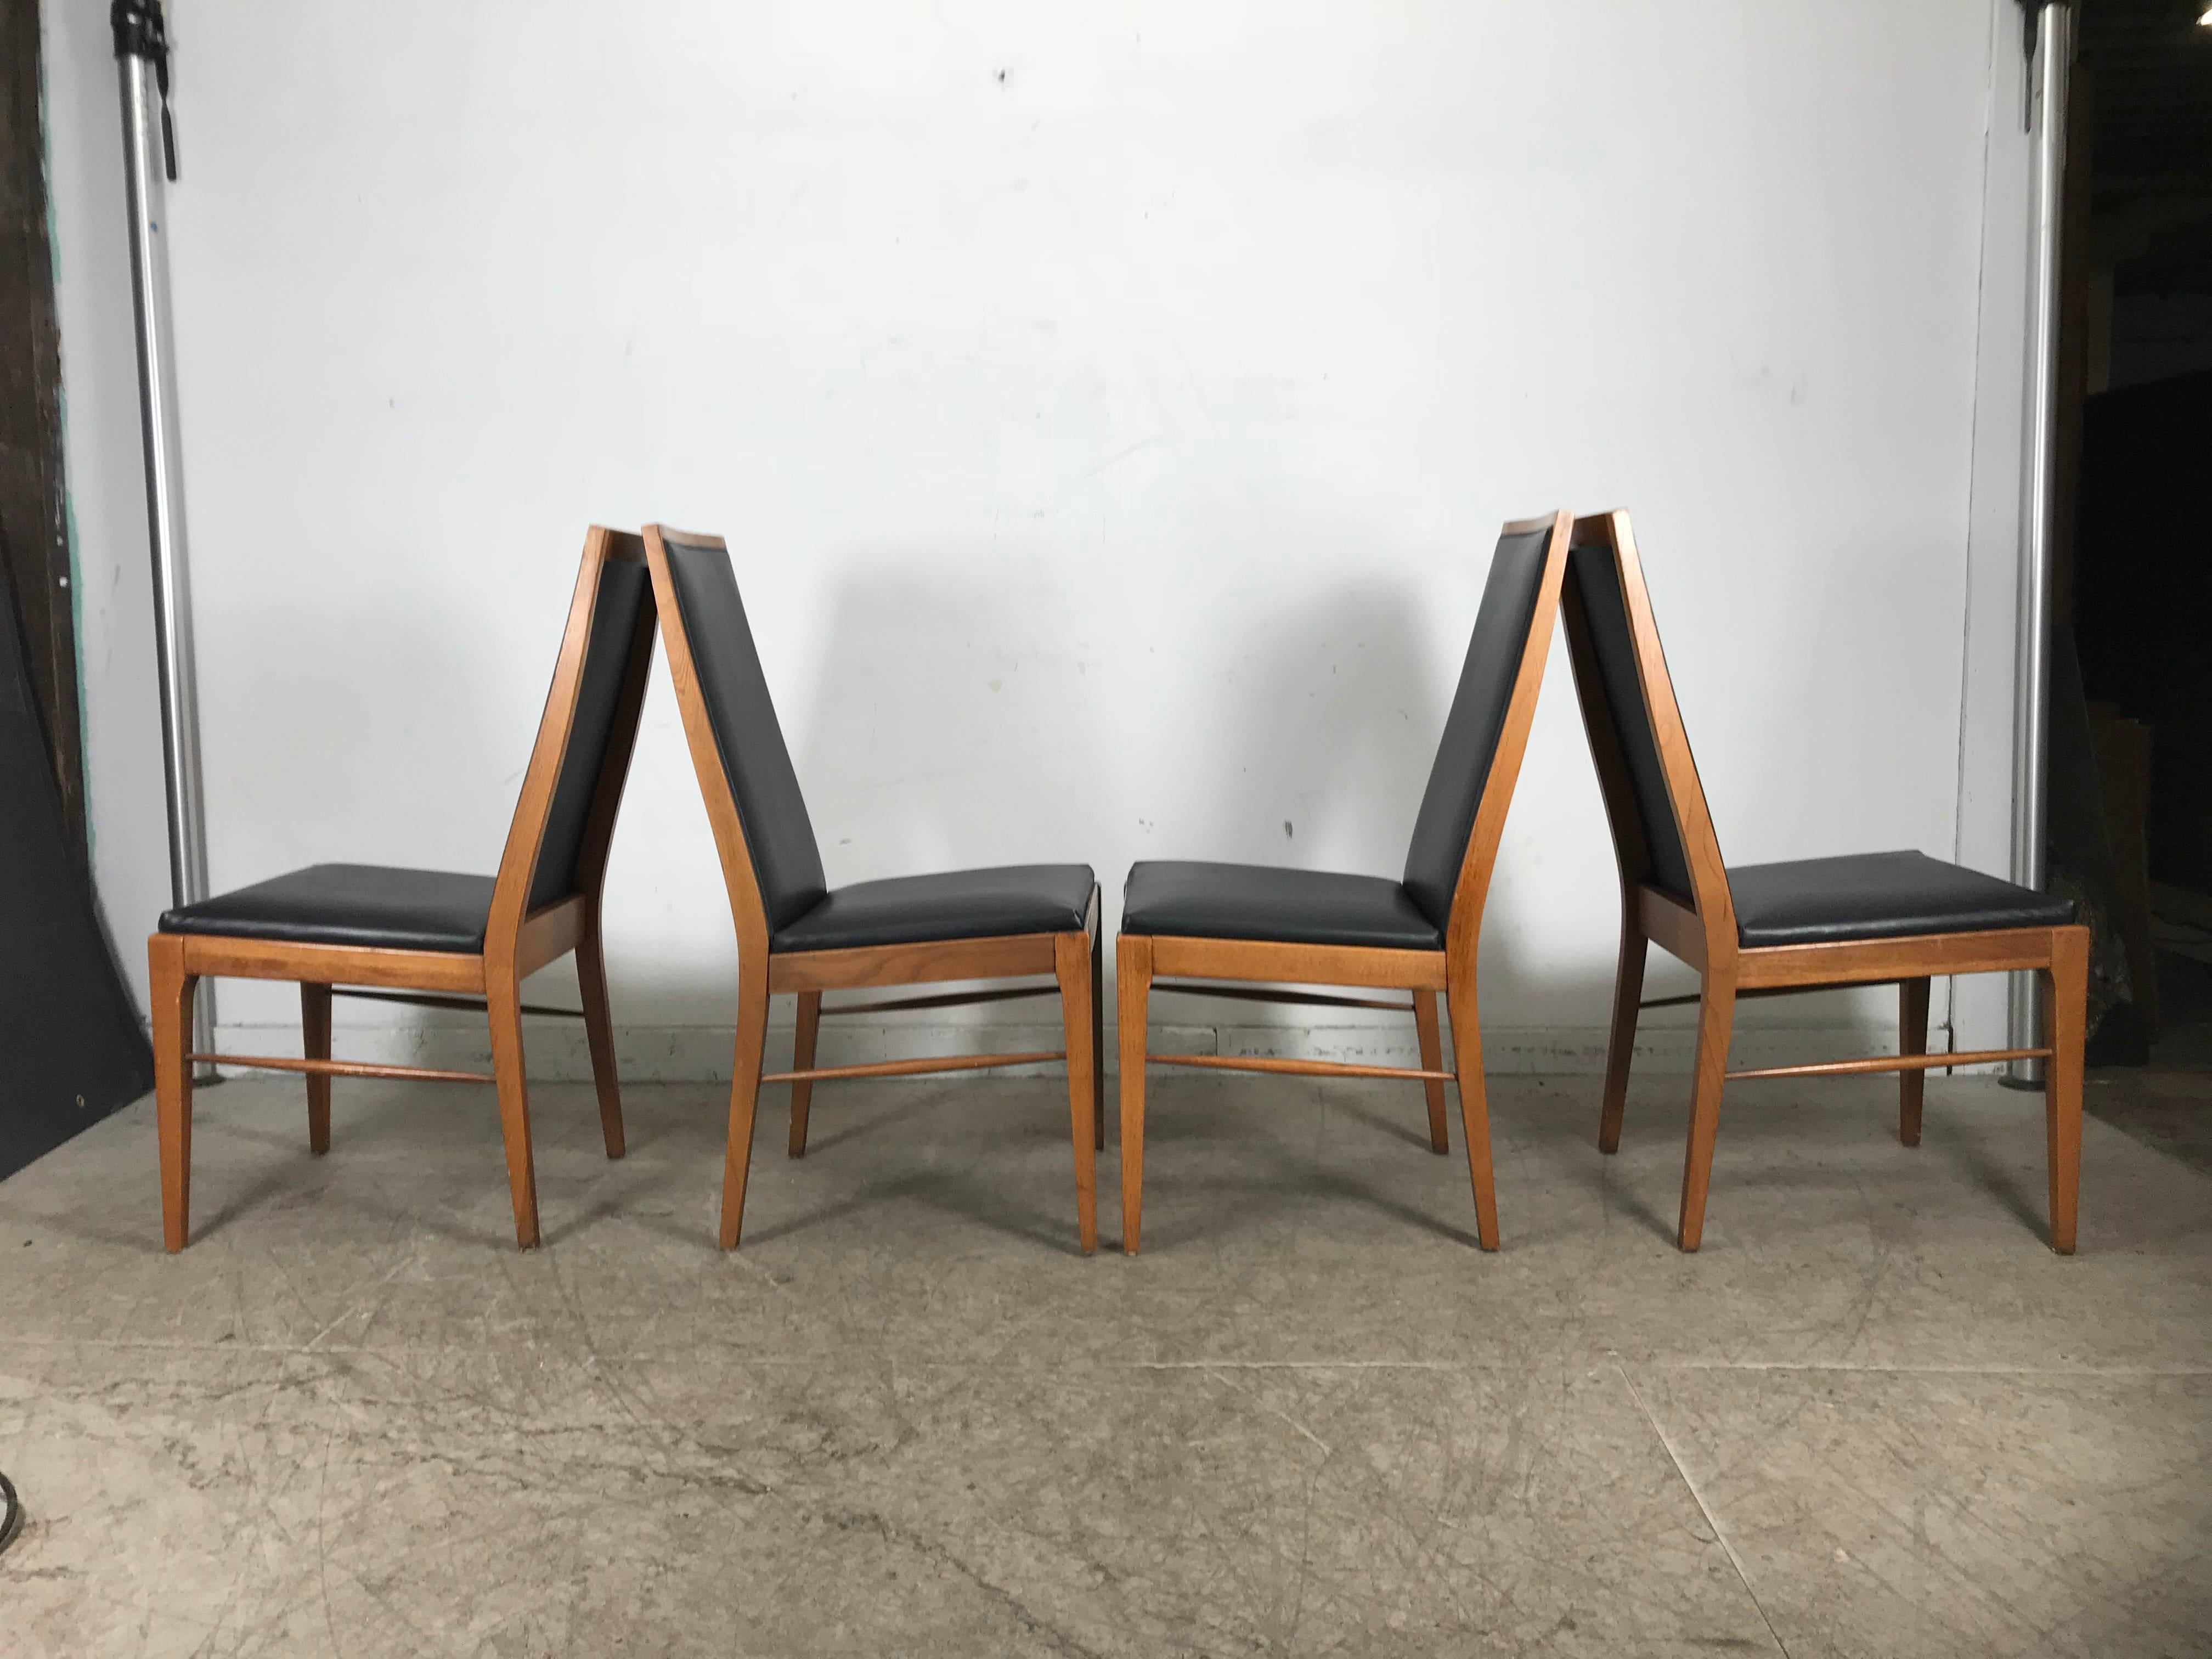 Set of Four Modernist Walnut Dining Chairs by Lane In Good Condition For Sale In Buffalo, NY